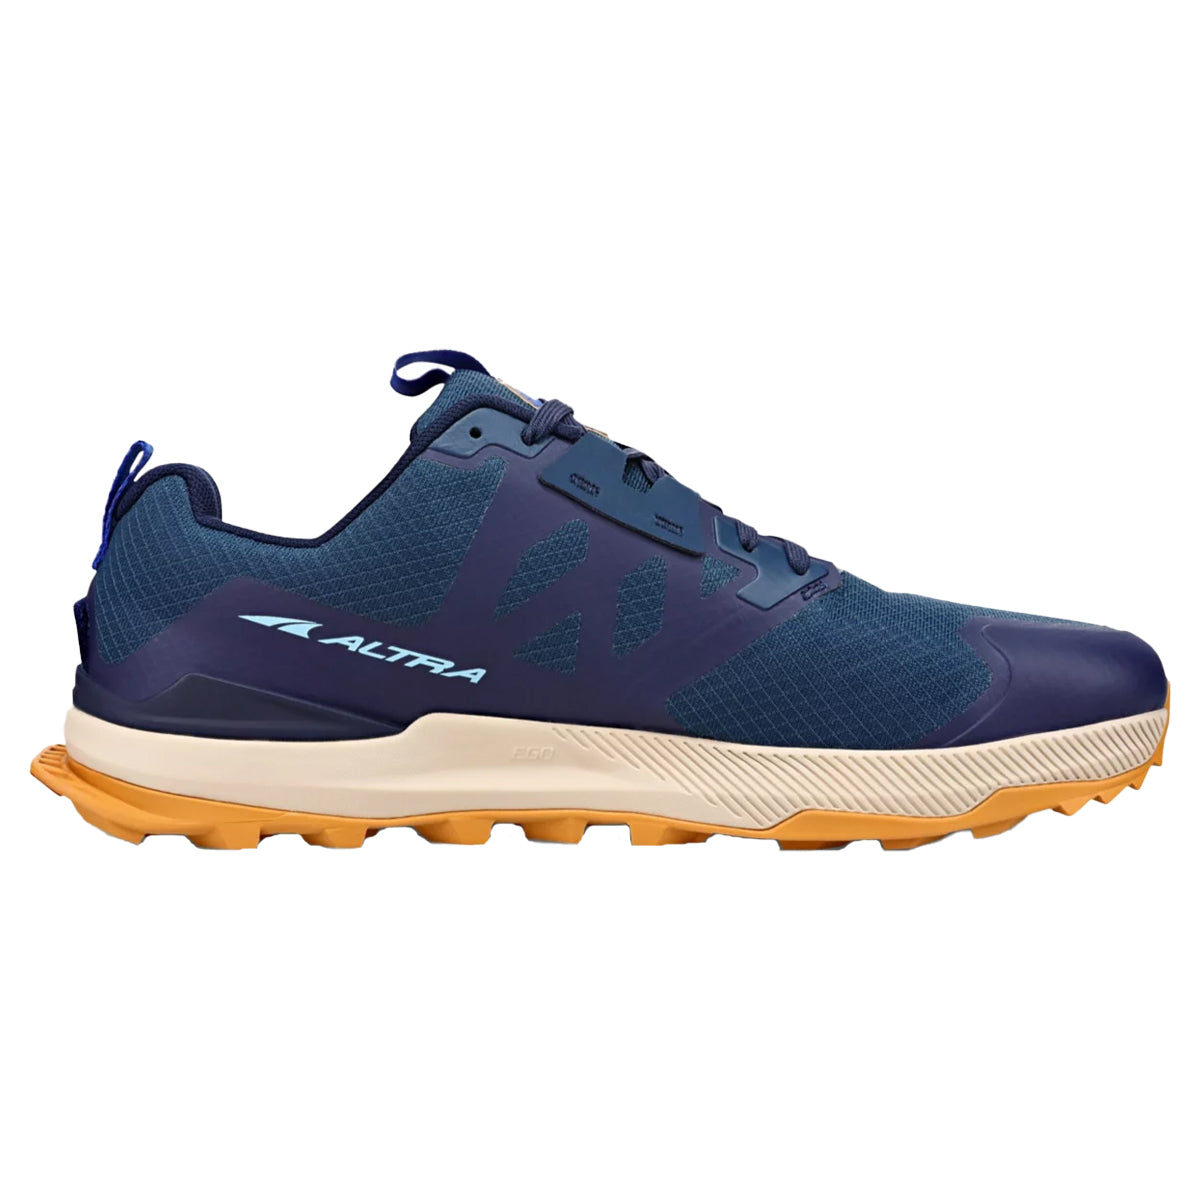 Altra Lone Peak 7 in Navy by GOHUNT | Altra - GOHUNT Shop